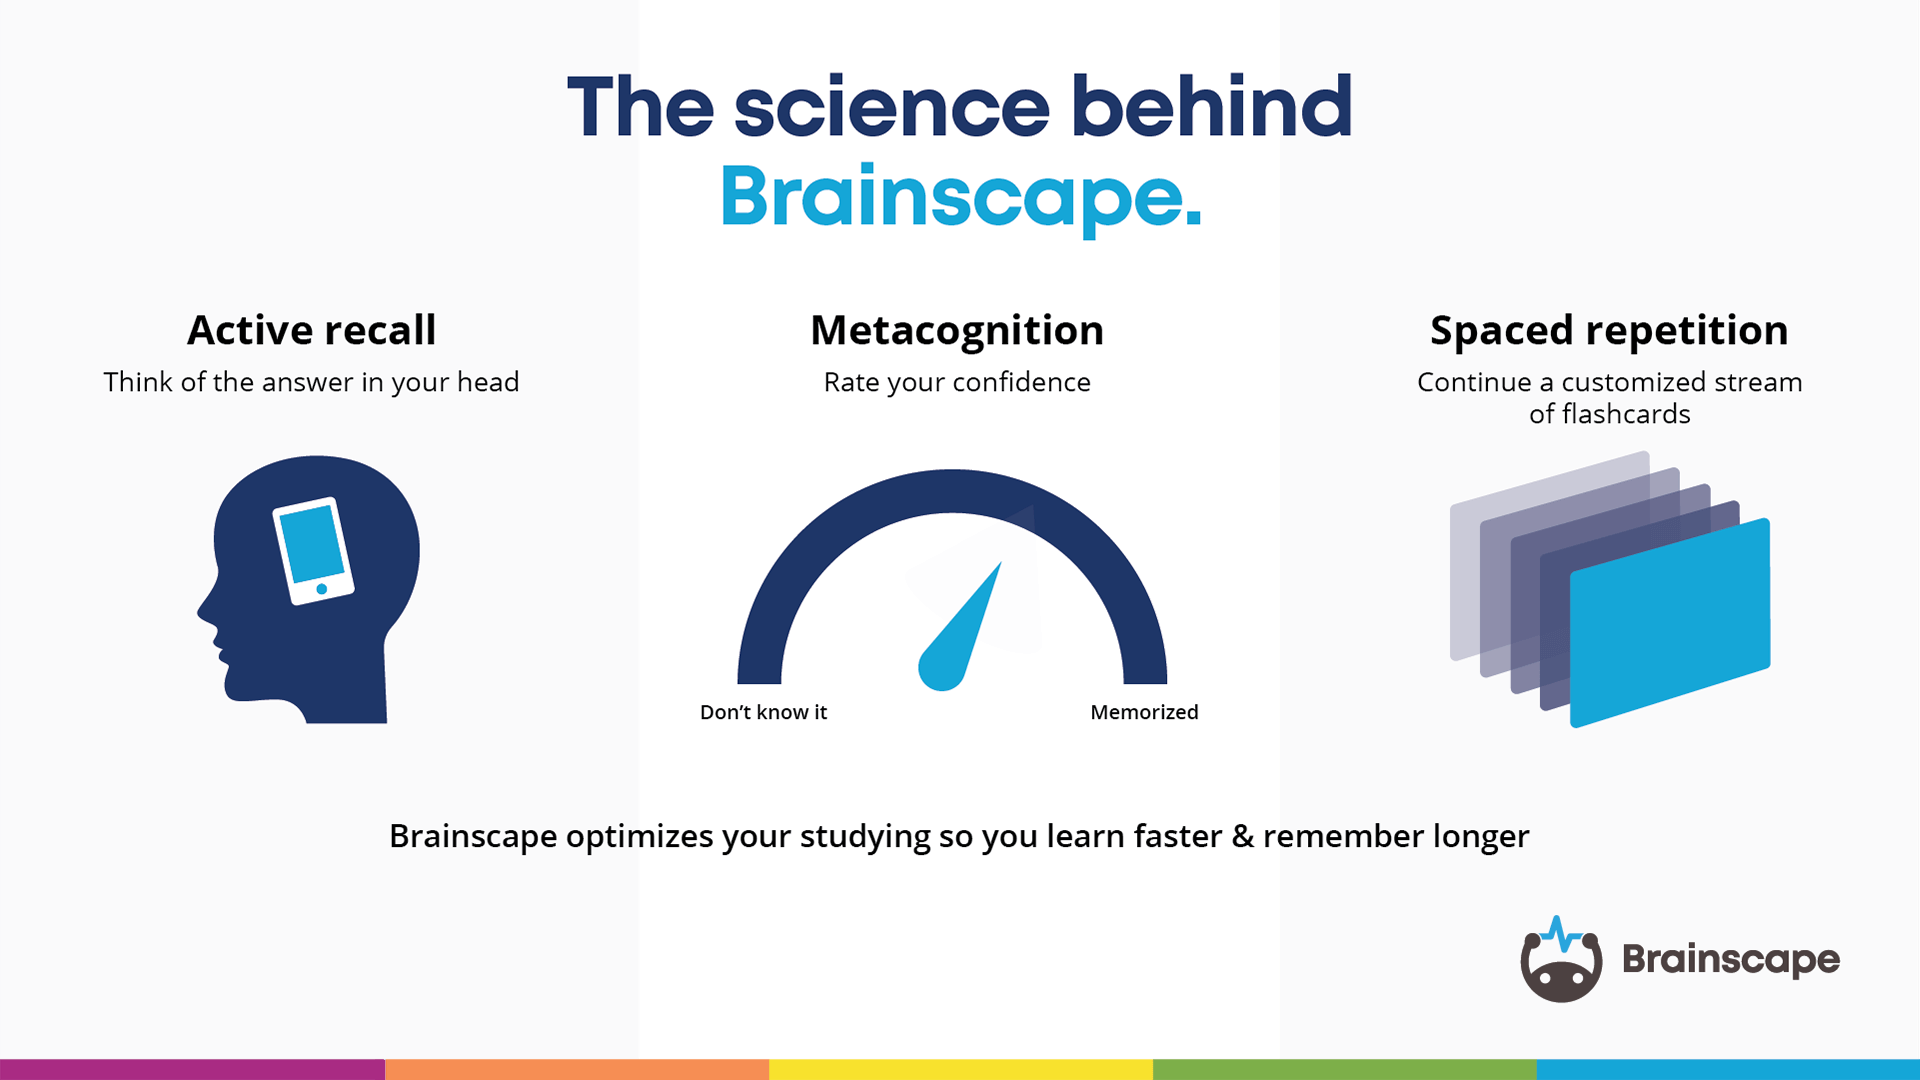 Science behind Brainscape graphic